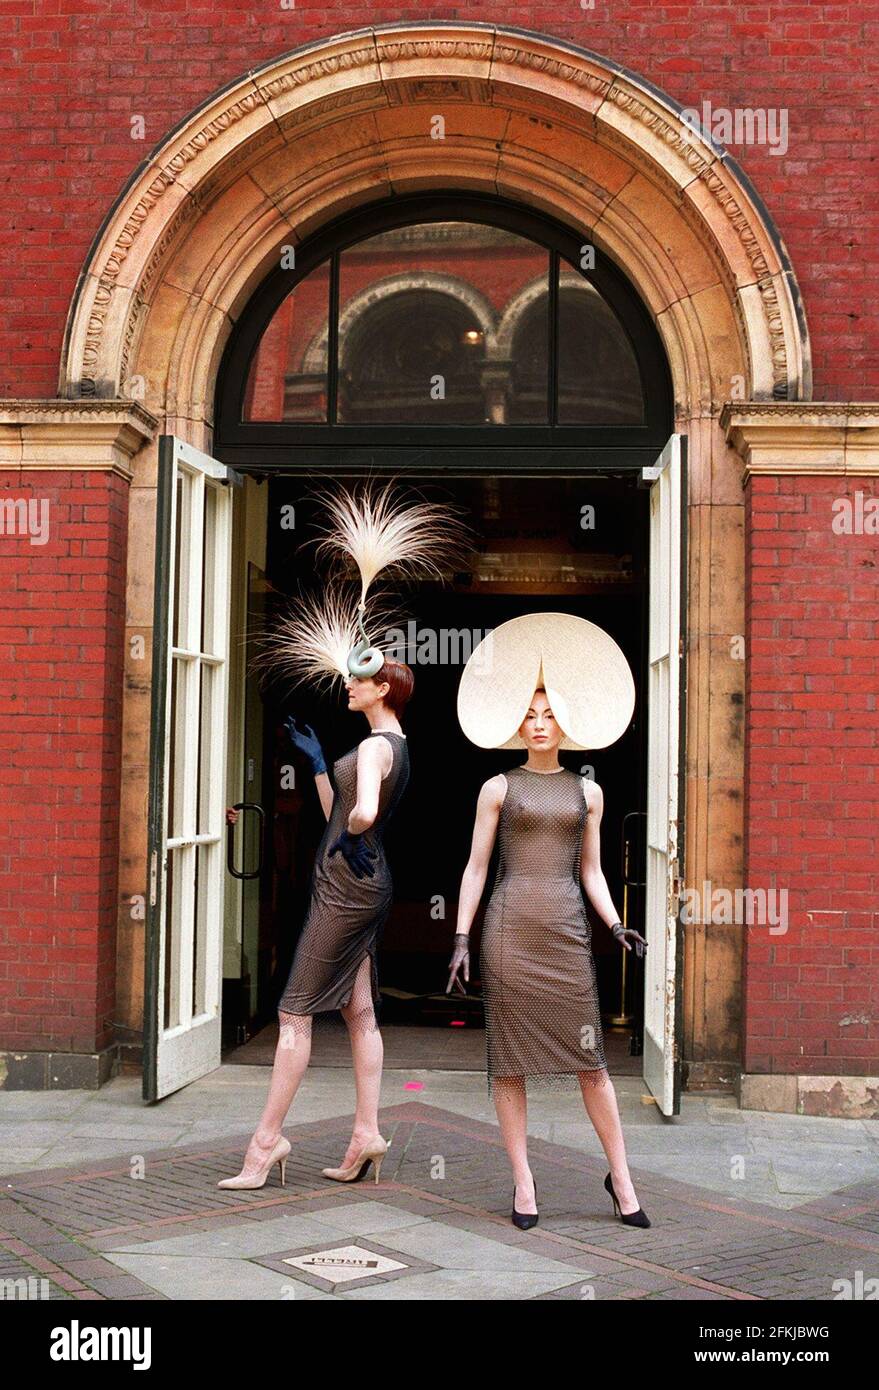 ALLA SAMARINA MAY 1999 WEARS A COPPER HELTER SKELTA HAT BY PHILIP TRACEY(R) AND MICHELLE PARADISE WEARS A PALE BLUE AND CREAM FEATHER EXPLOSION FOR 'FASHION IN MOTION' AT THE V & A, IN FRONT OF THE THREE GRACES. IT IS ALSO THE 100 ANNIVERSARY OF THE MUSEUM. PHOTOGRAPH BY MARK CHILVERS. 19/5/1999 Stock Photo